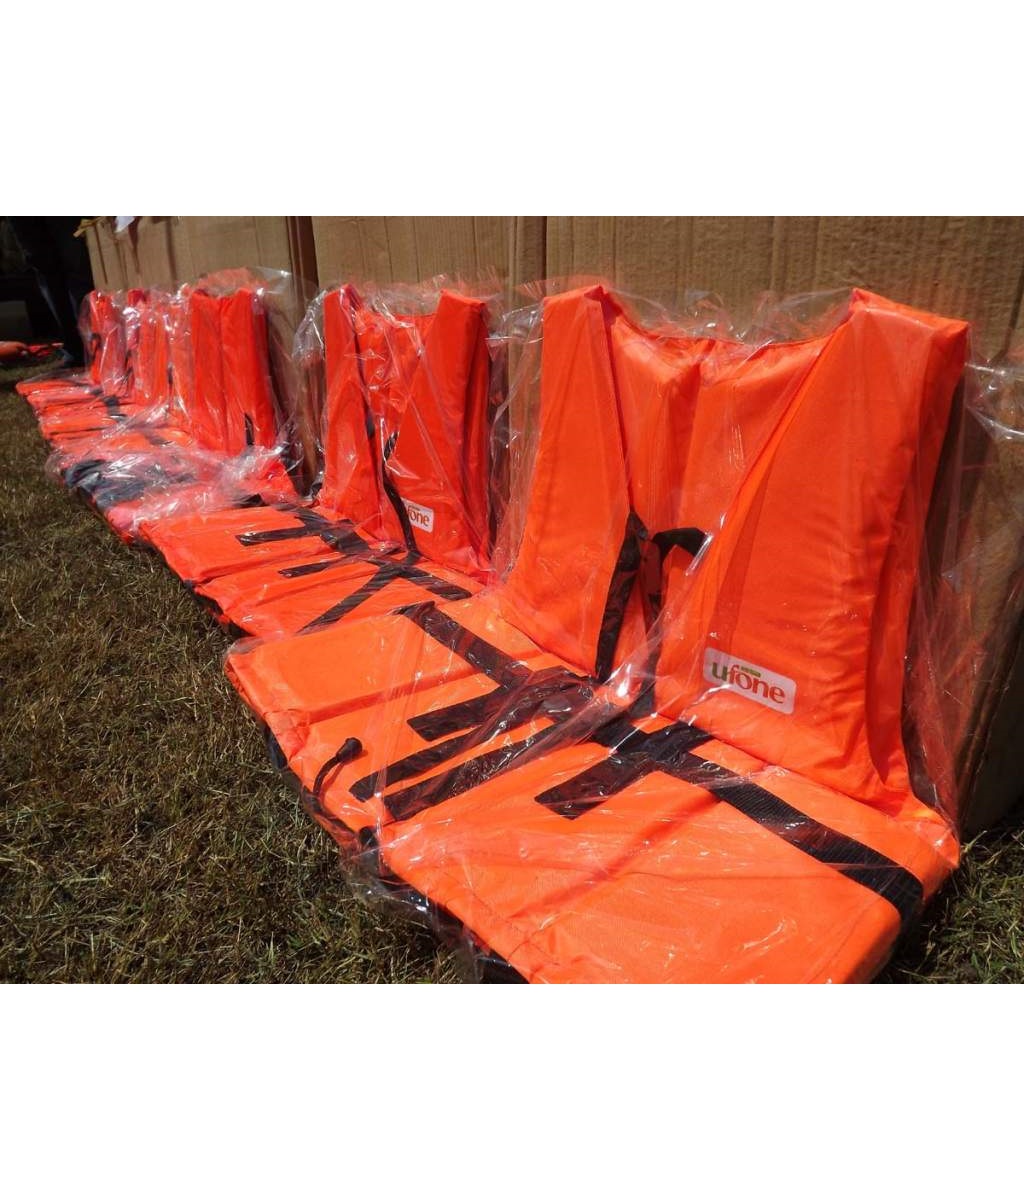 Ufone Provides Life Jackets for Flood Relief